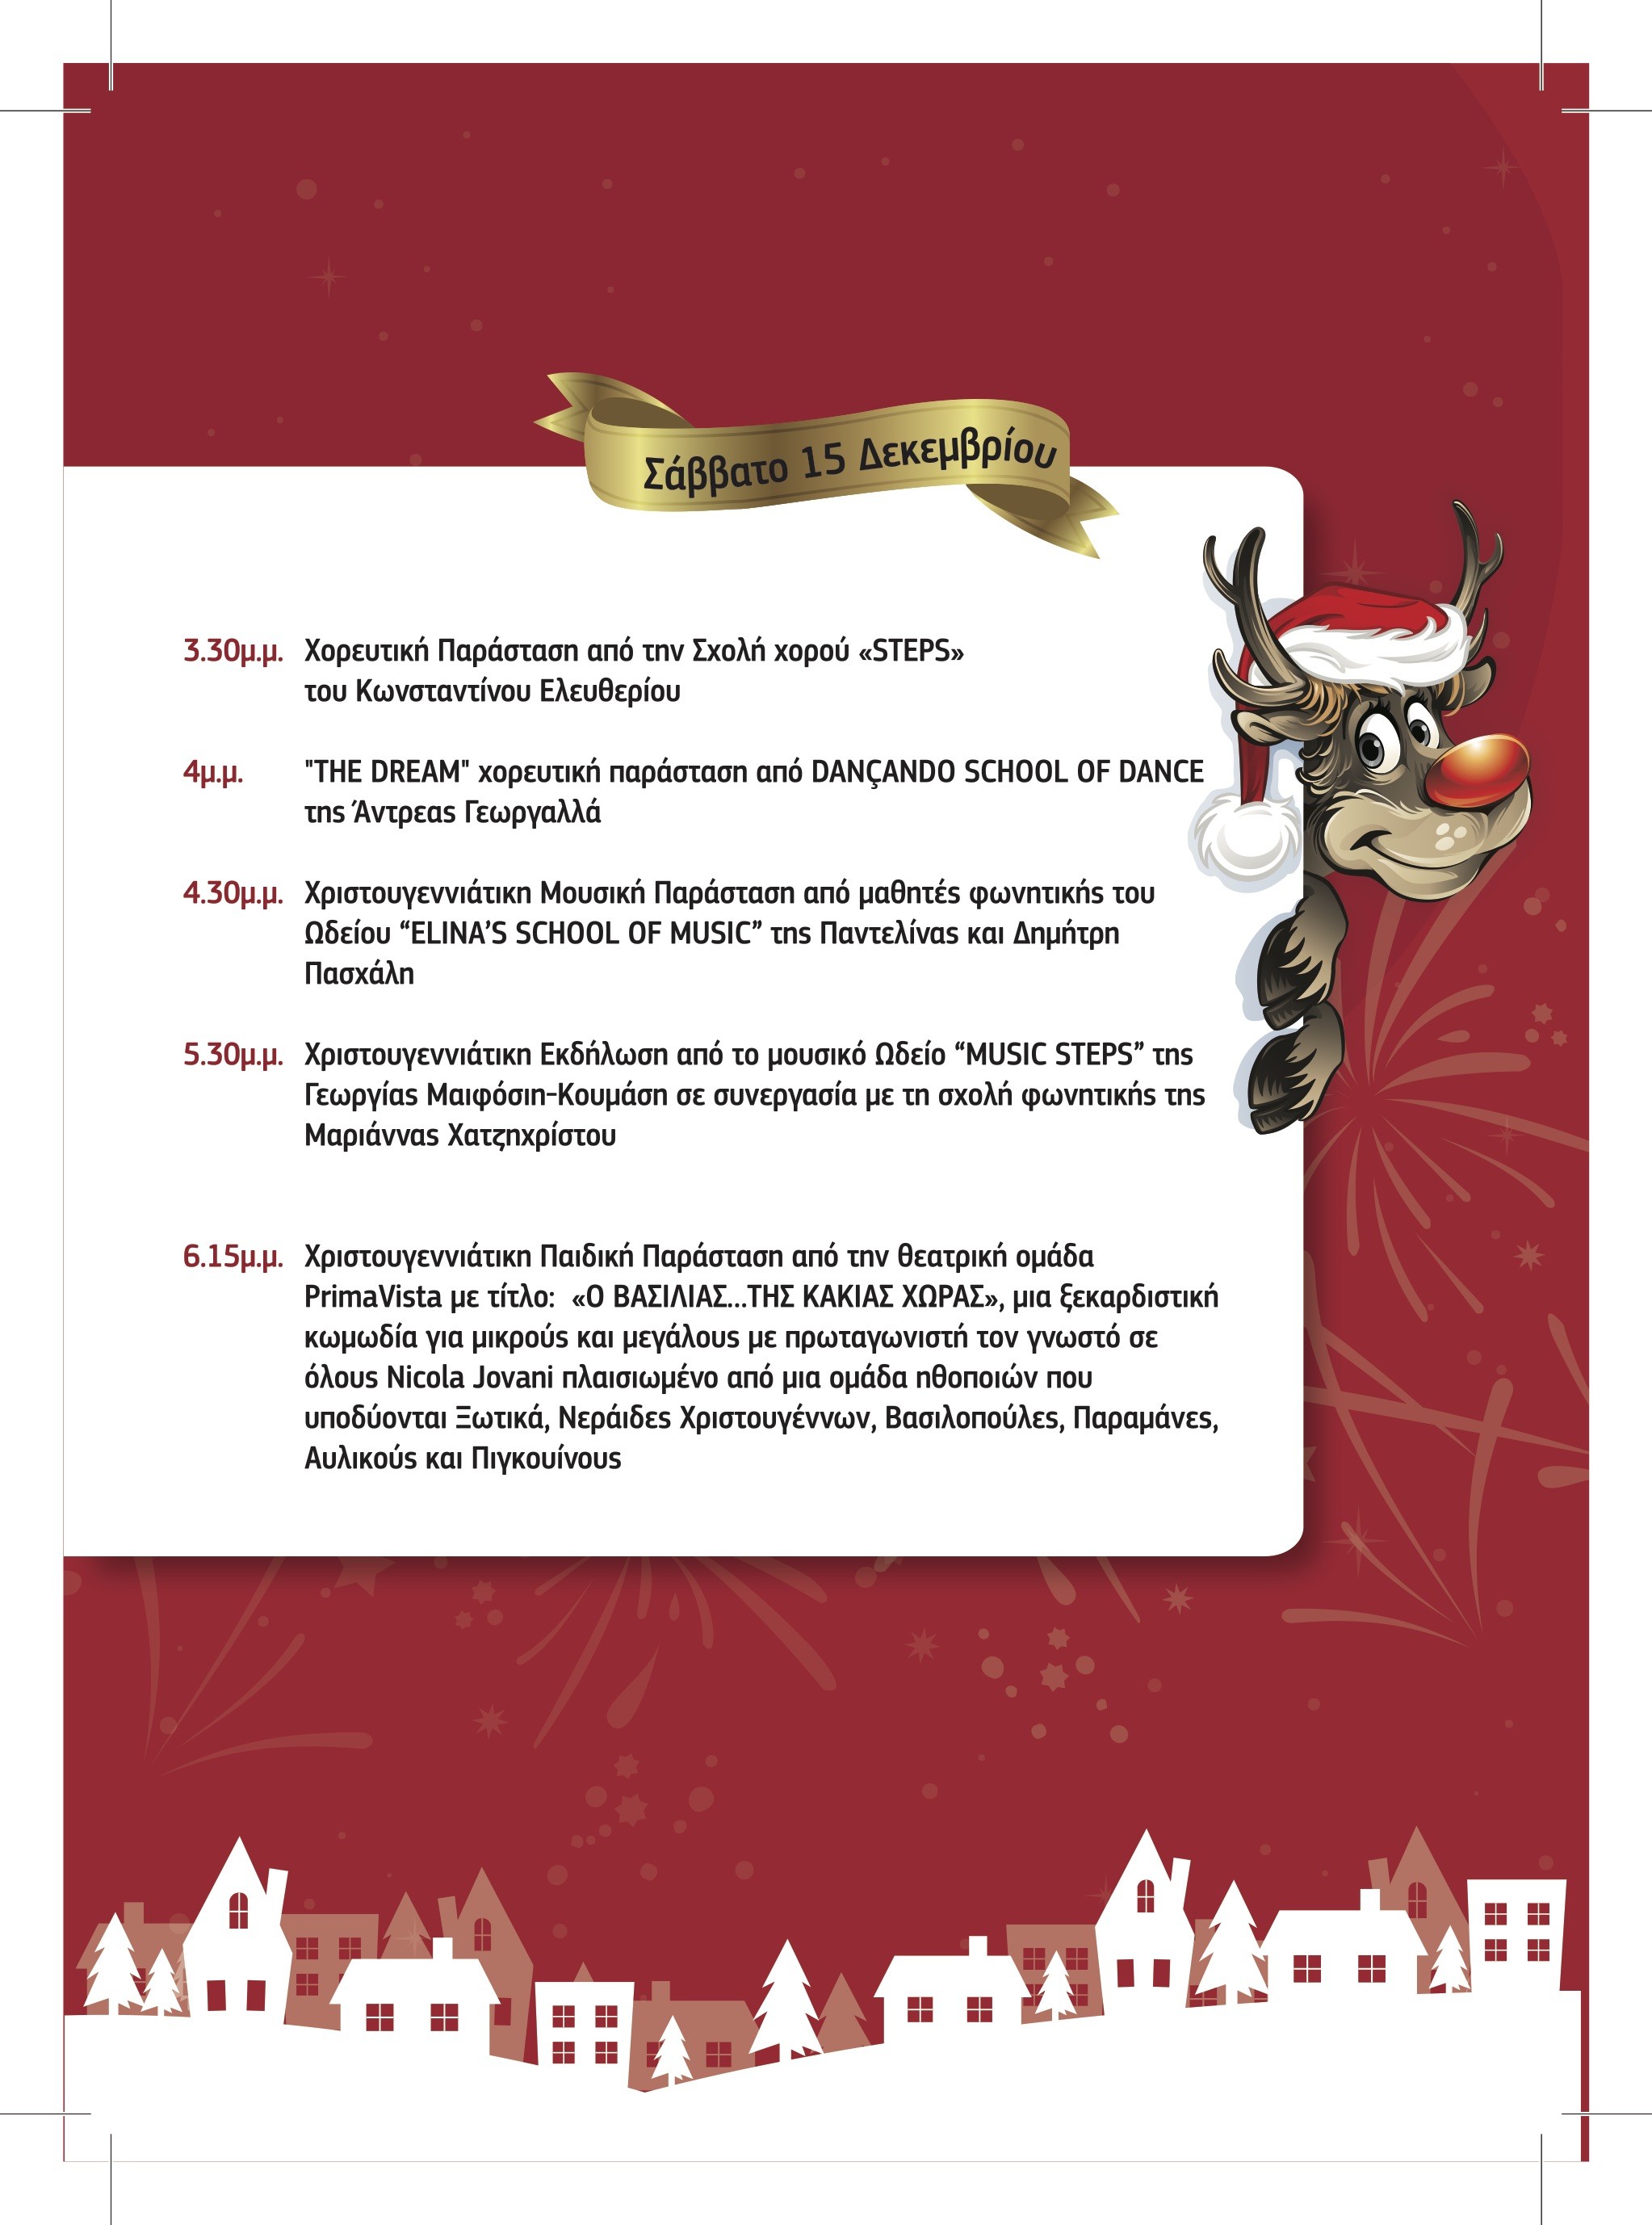 FINAL PROGRAM OF CHRISTMAS EVENTS PROGRAMME OF EVENTS Paramythoupolis Christmas, Christmas